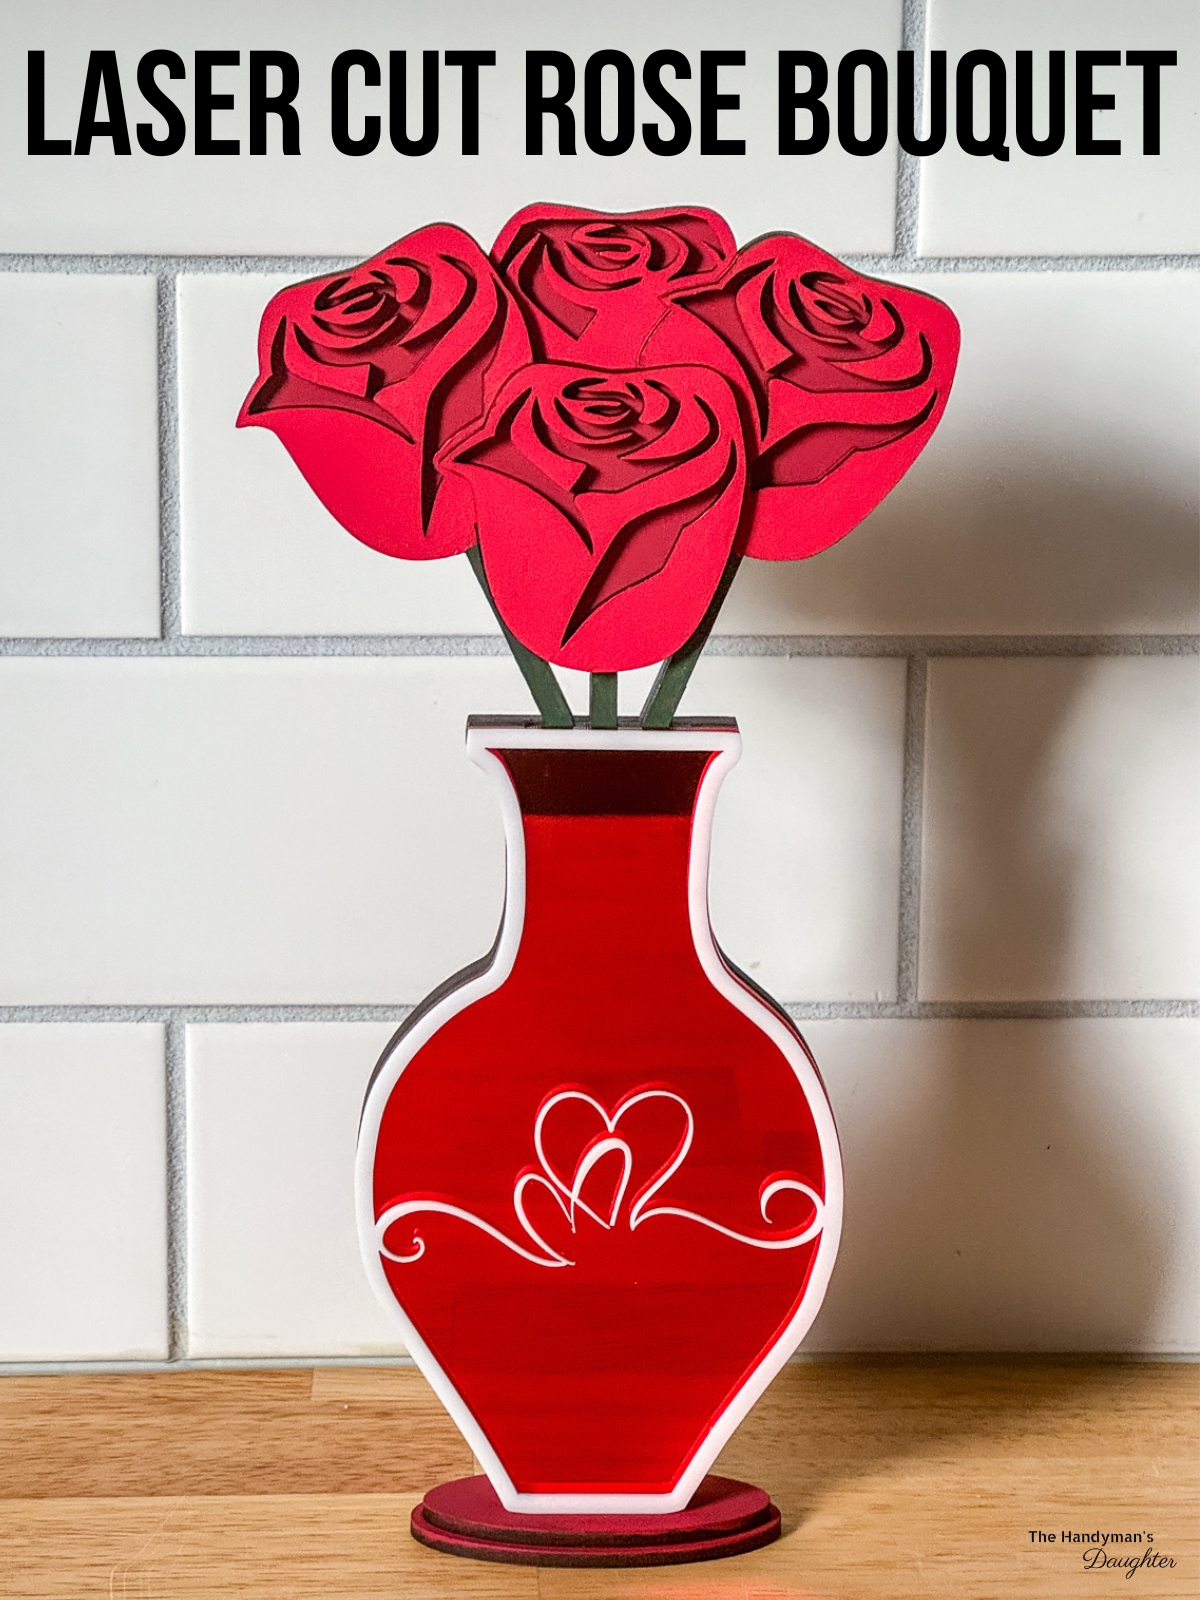 laser cut rose bouquet with text overlay